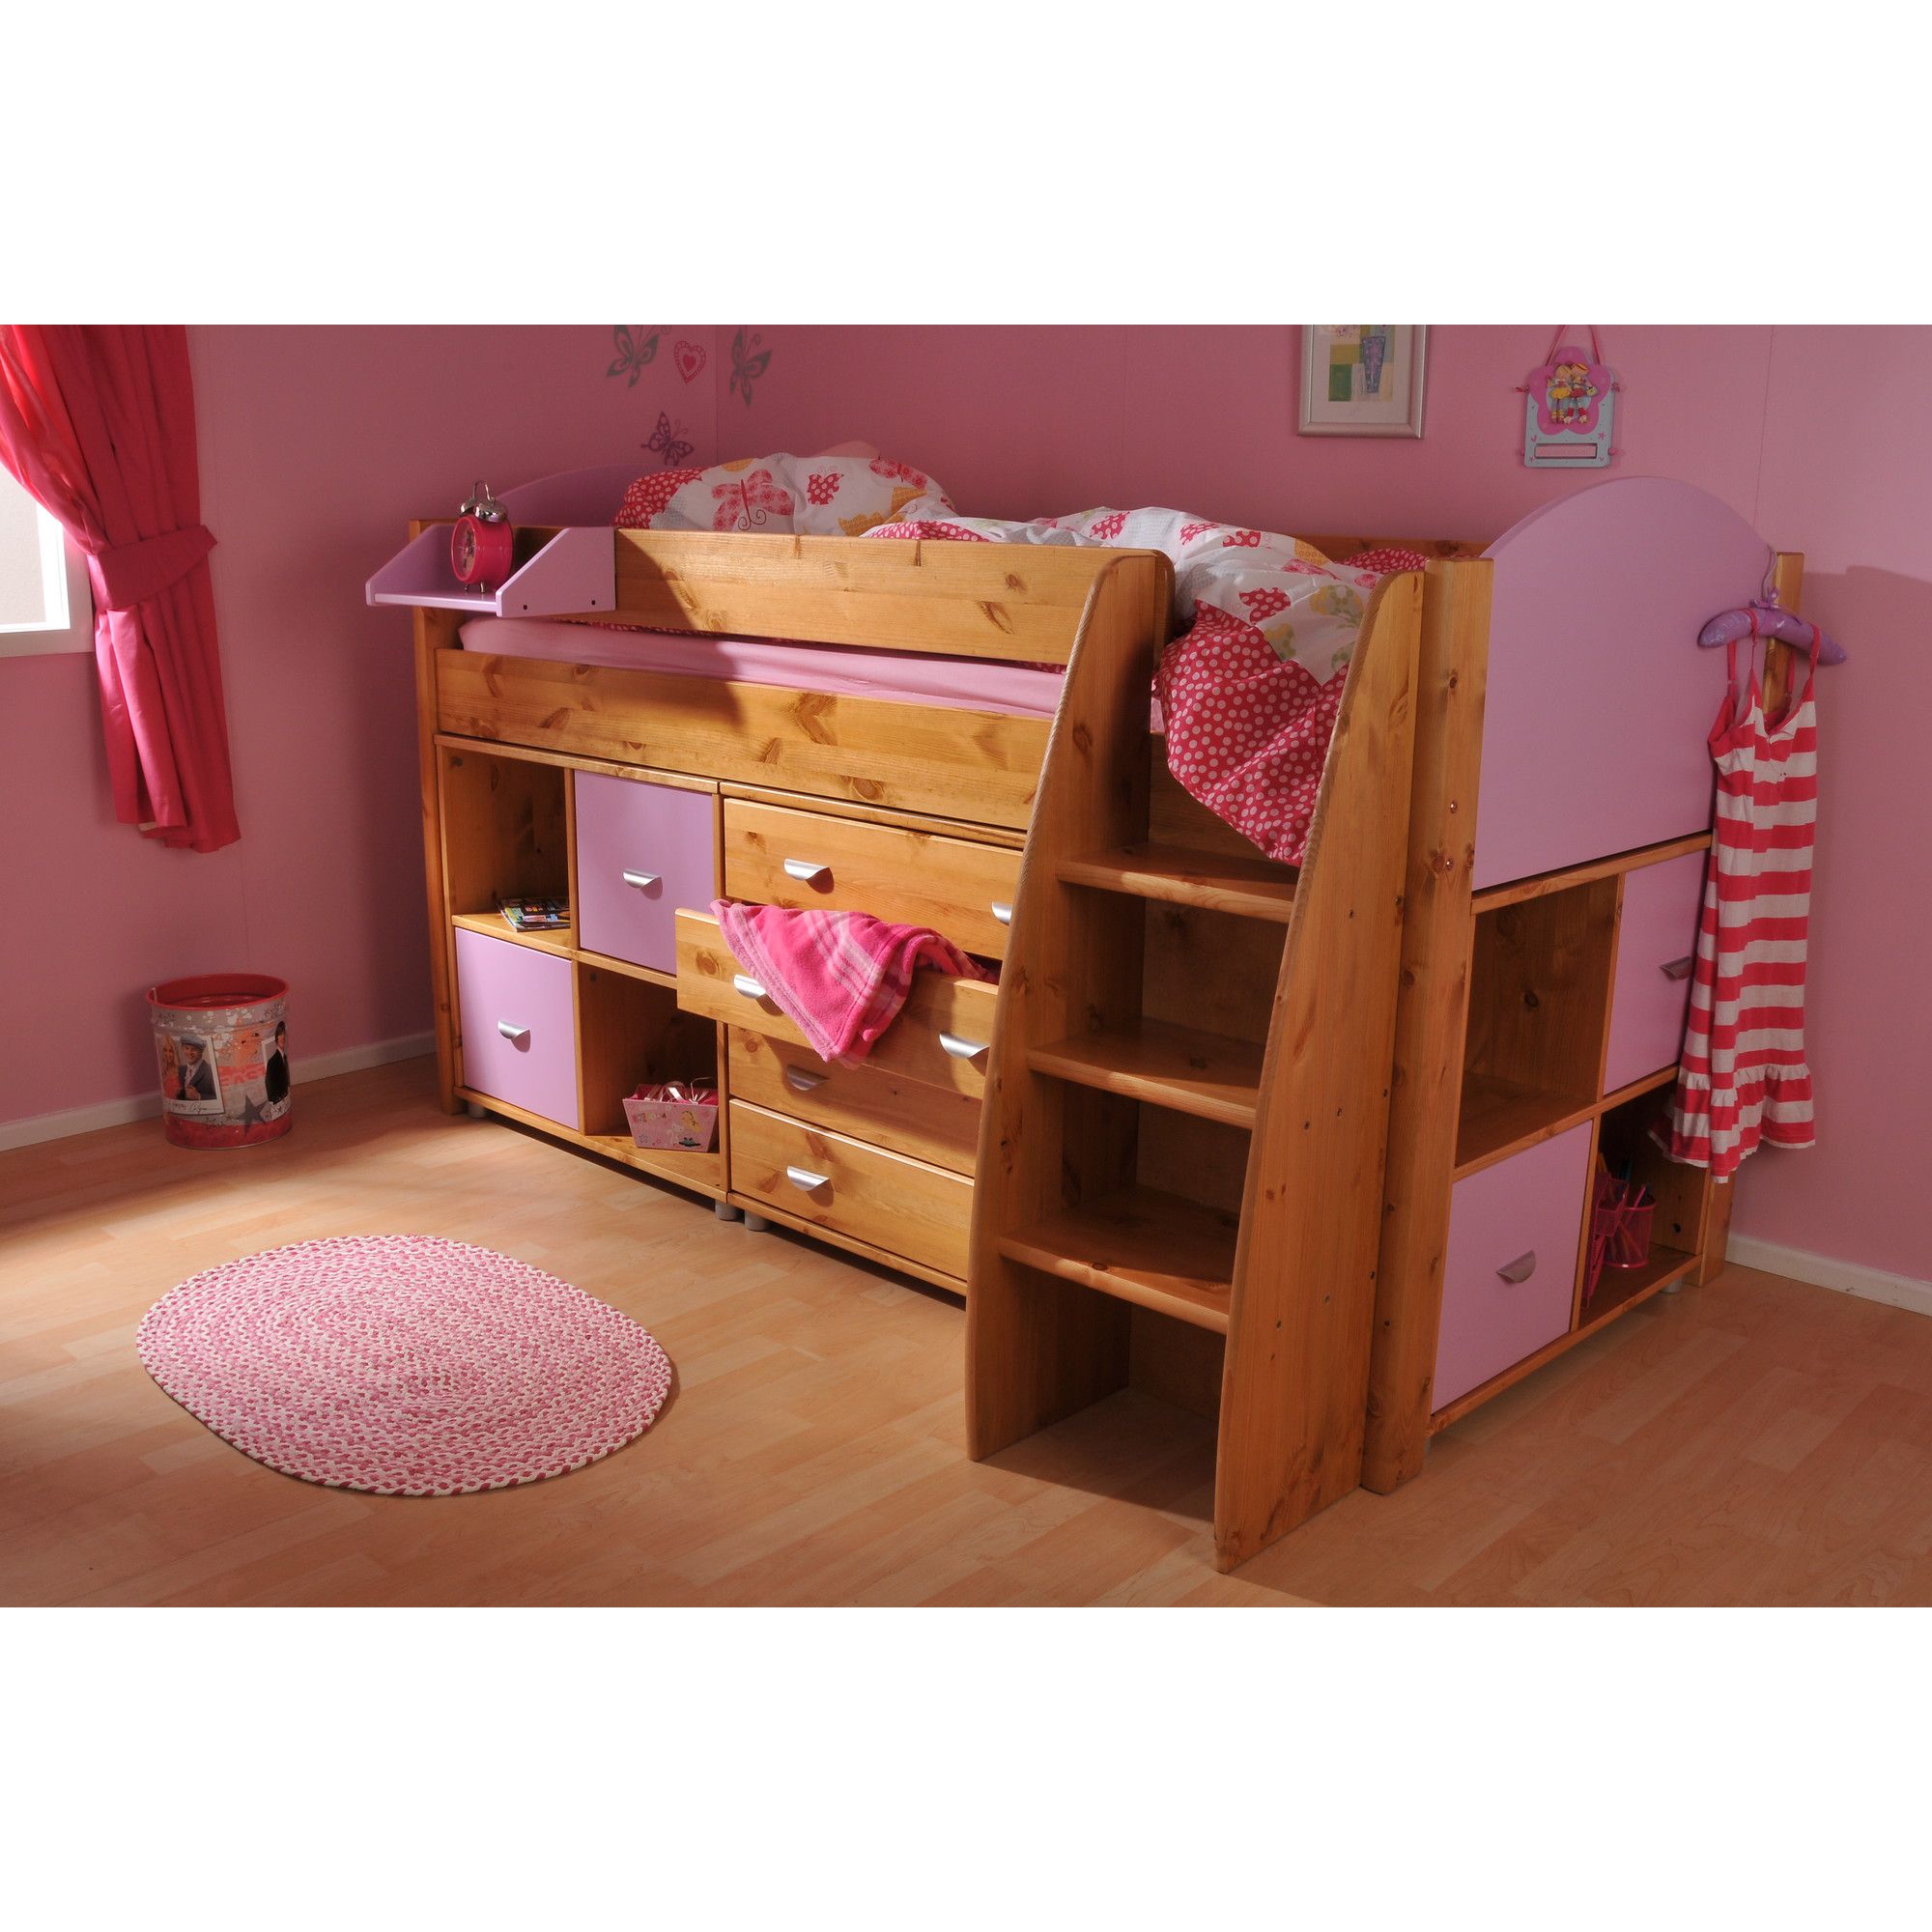 Stompa Rondo Mid Sleeper with 4 Drawer Chest and Cube Units - Antique - Lilac at Tesco Direct